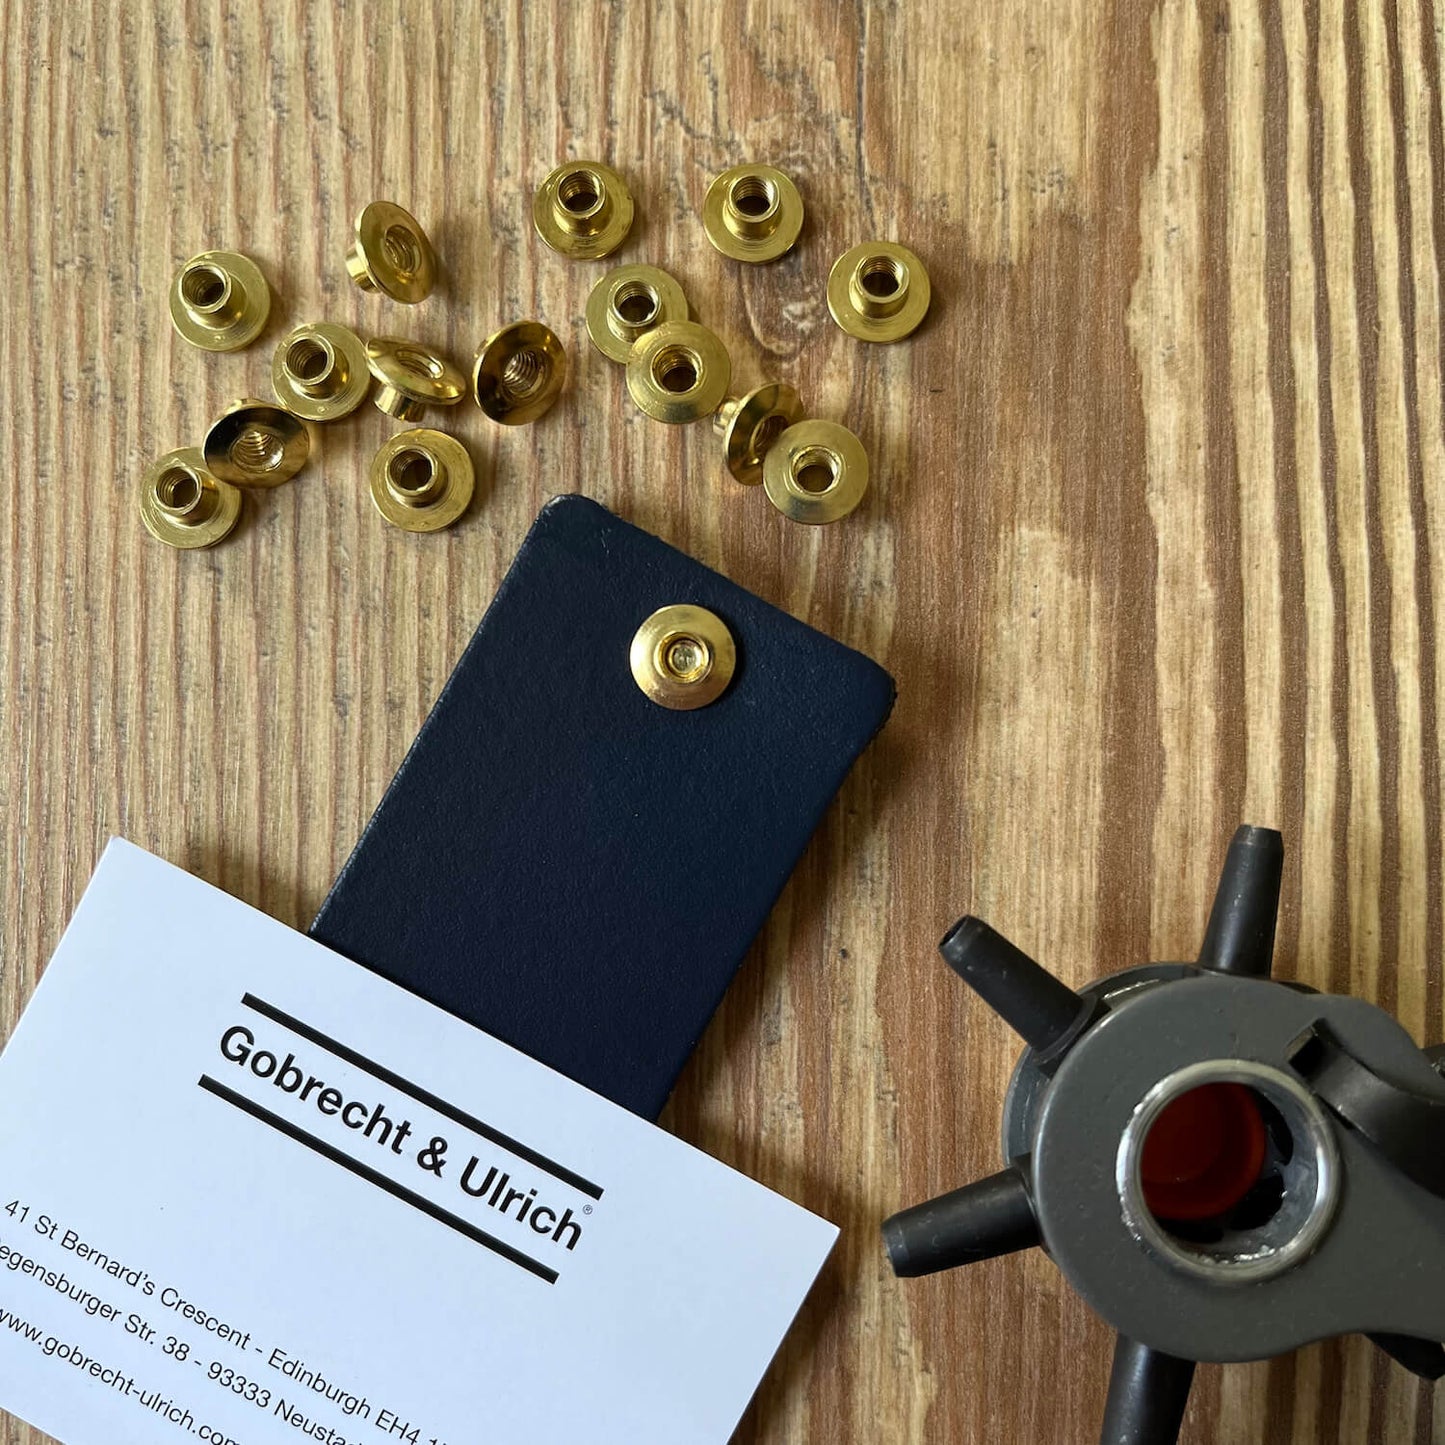 Short brass binding screws scattered on a wooden surface, a silver binding screw fastened to a piece of dark blue leather, and a leather hole punch